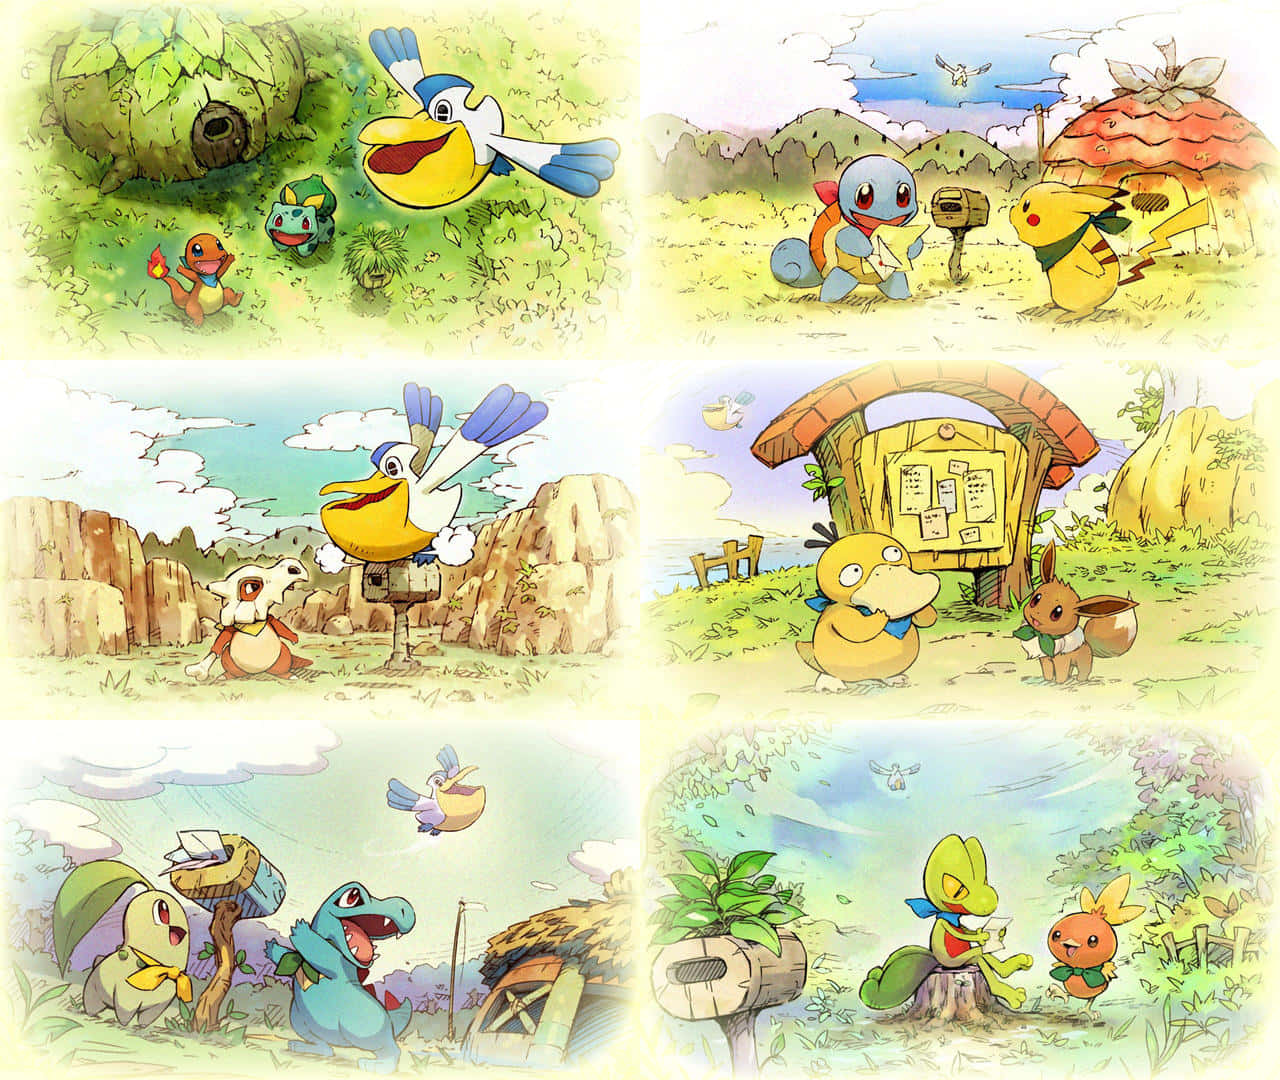 A group of brave Pokemon tackle a Mystery Dungeon Wallpaper